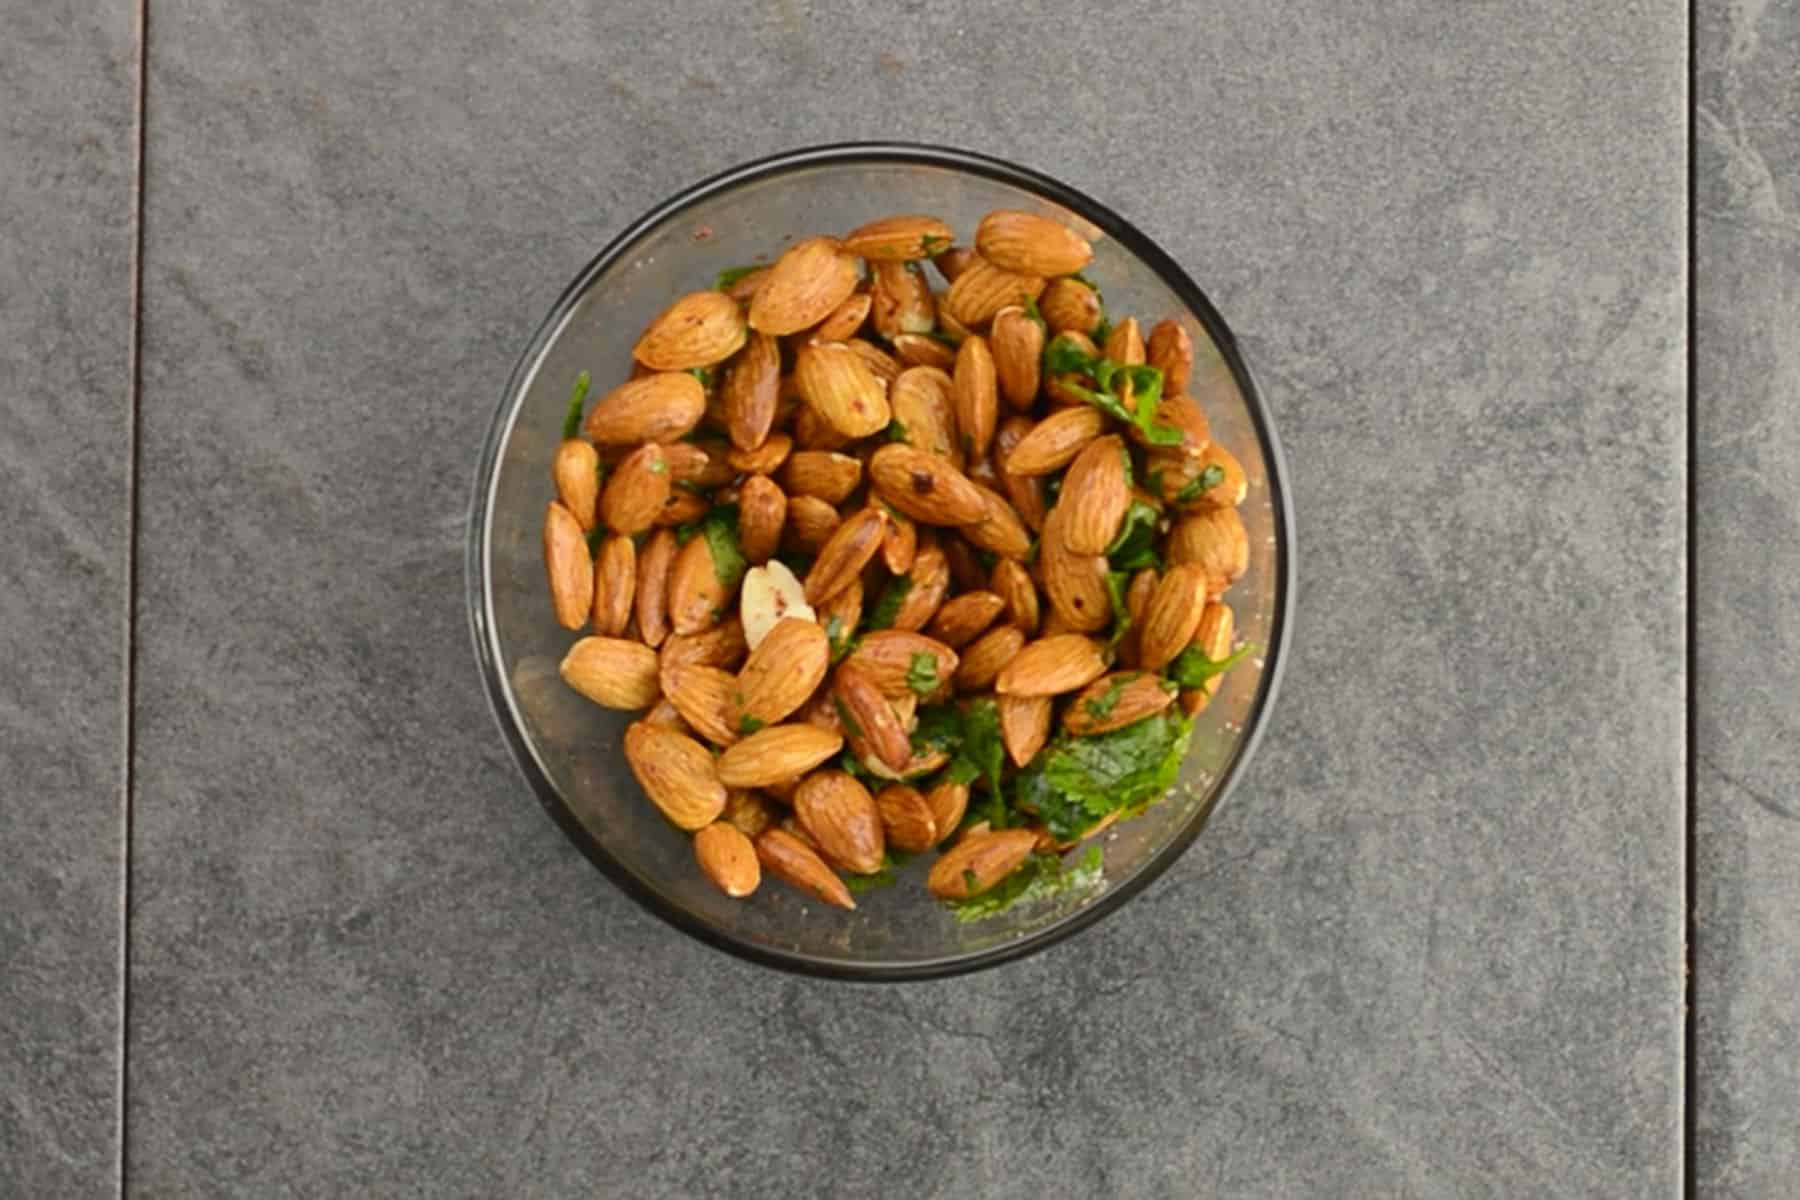 steps and procedure for making chili almonds